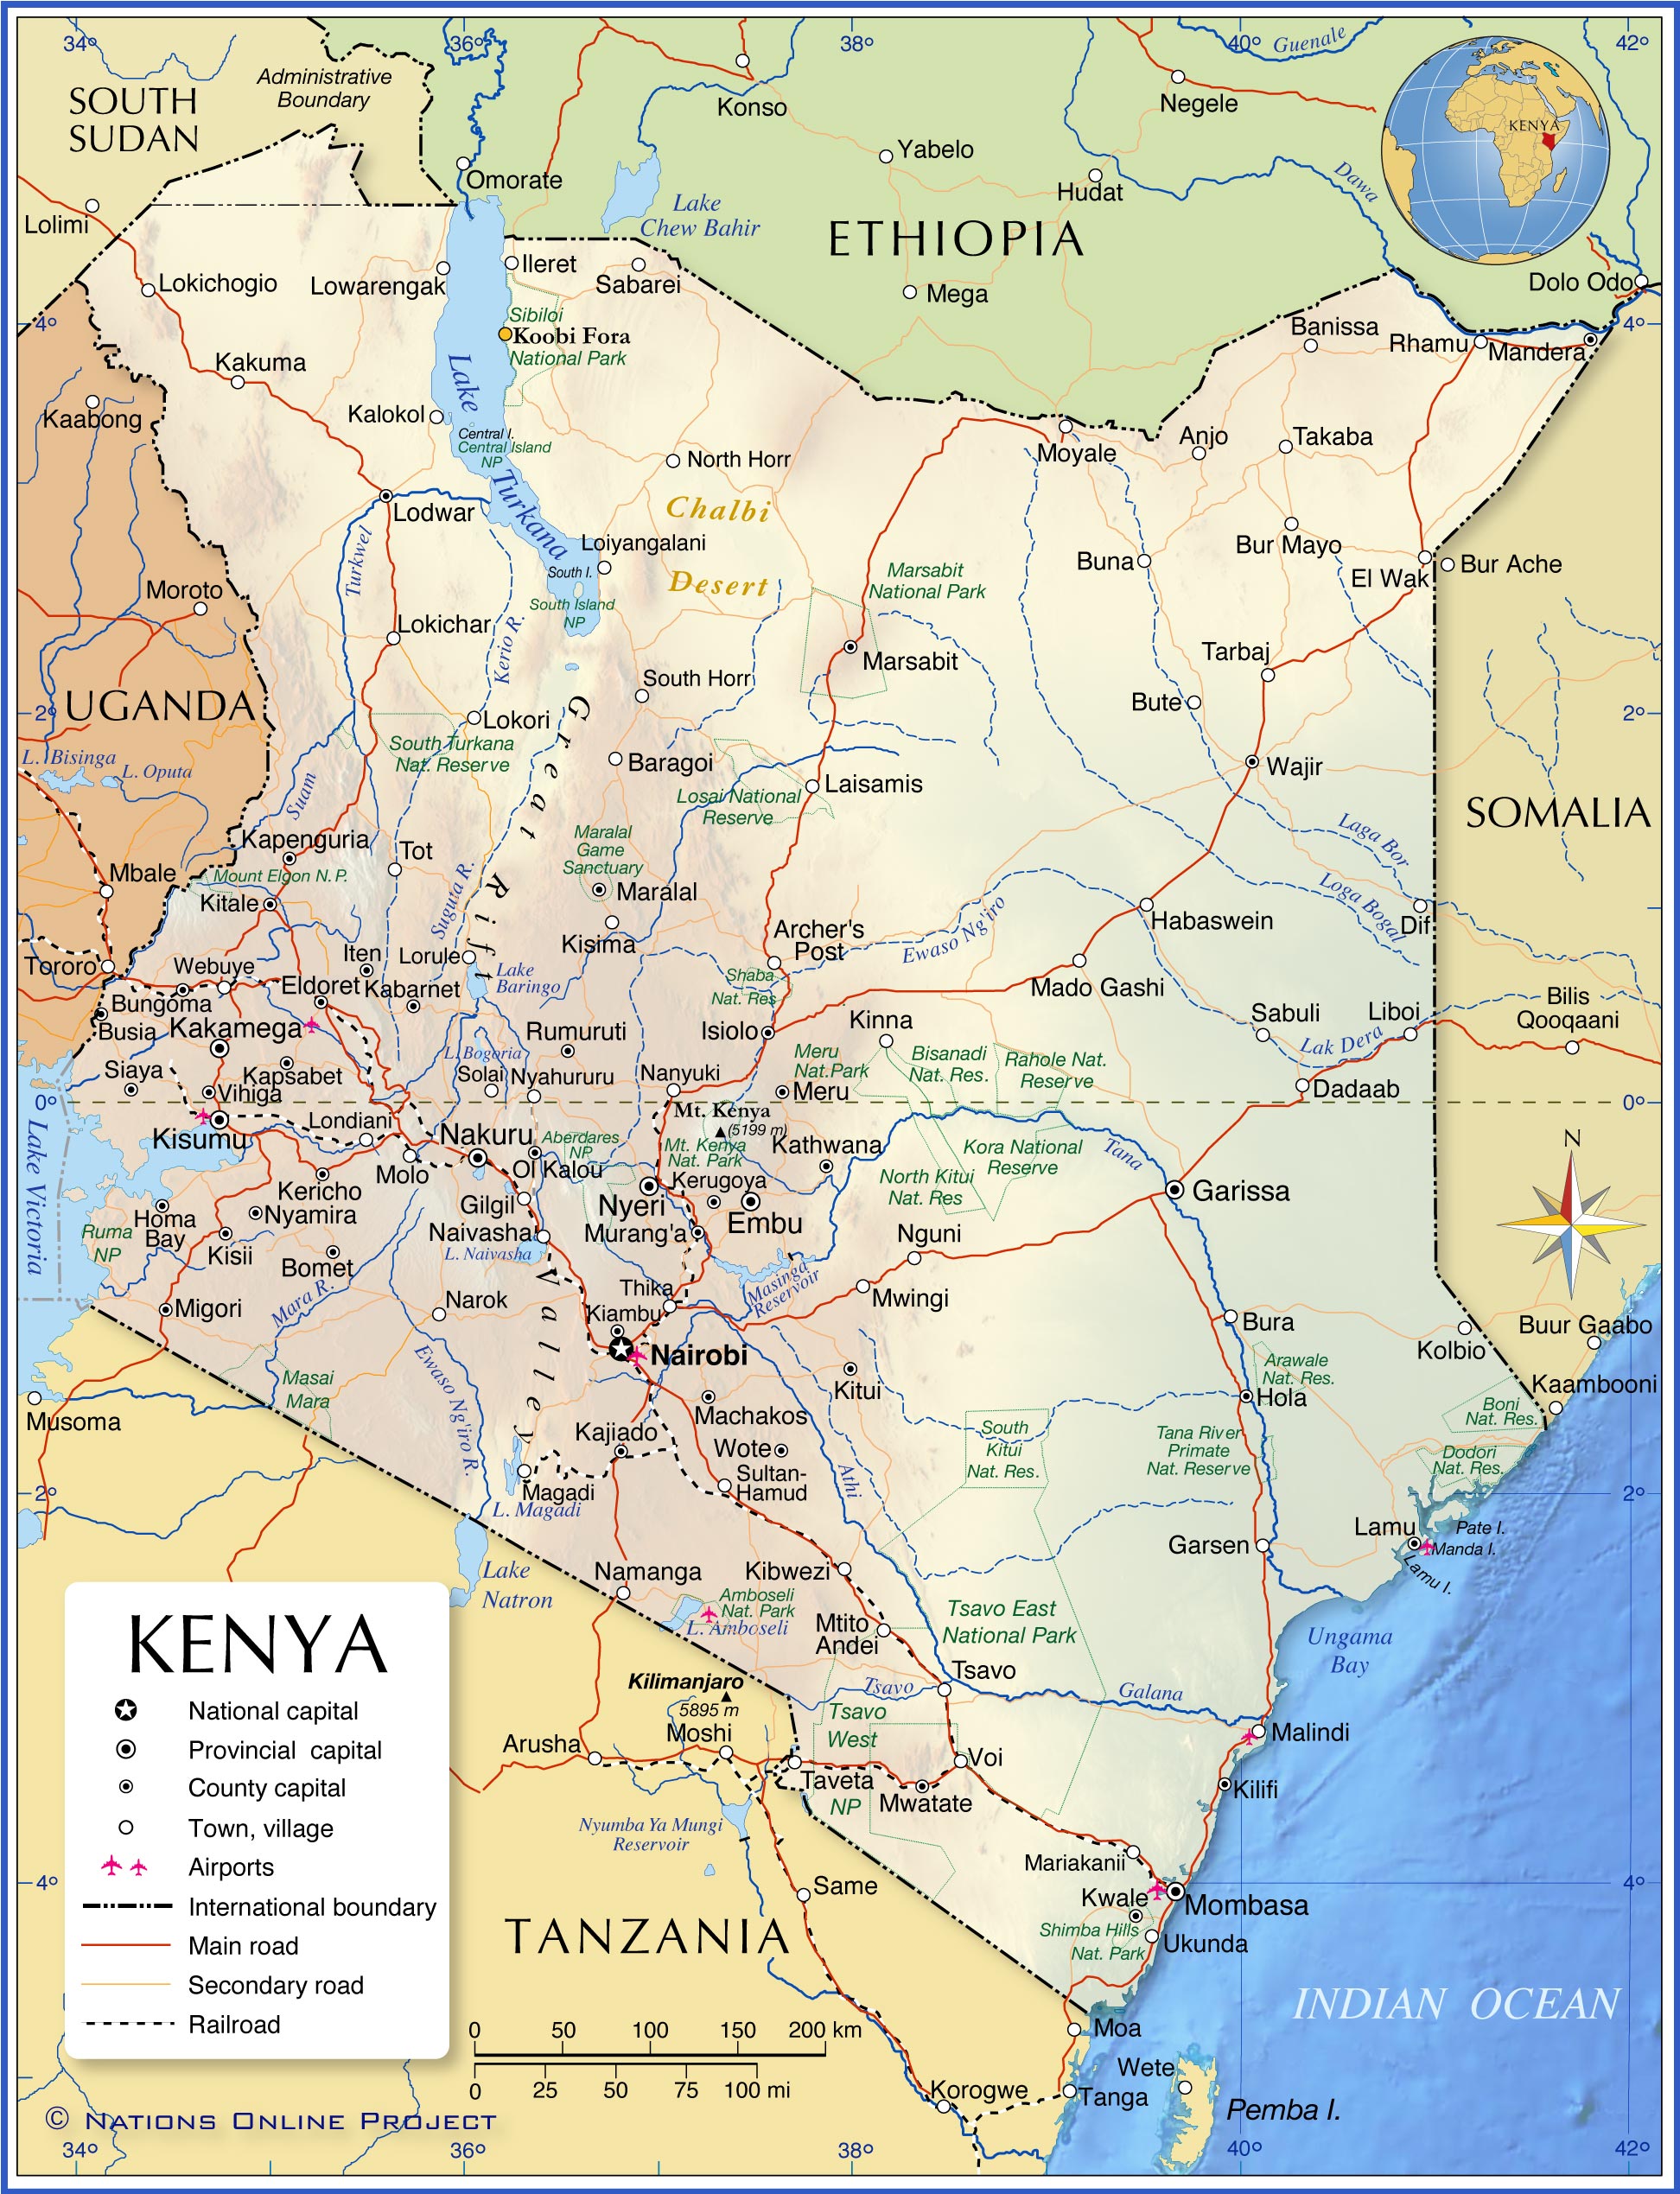 Political Map of Kenya - Nations Online Project